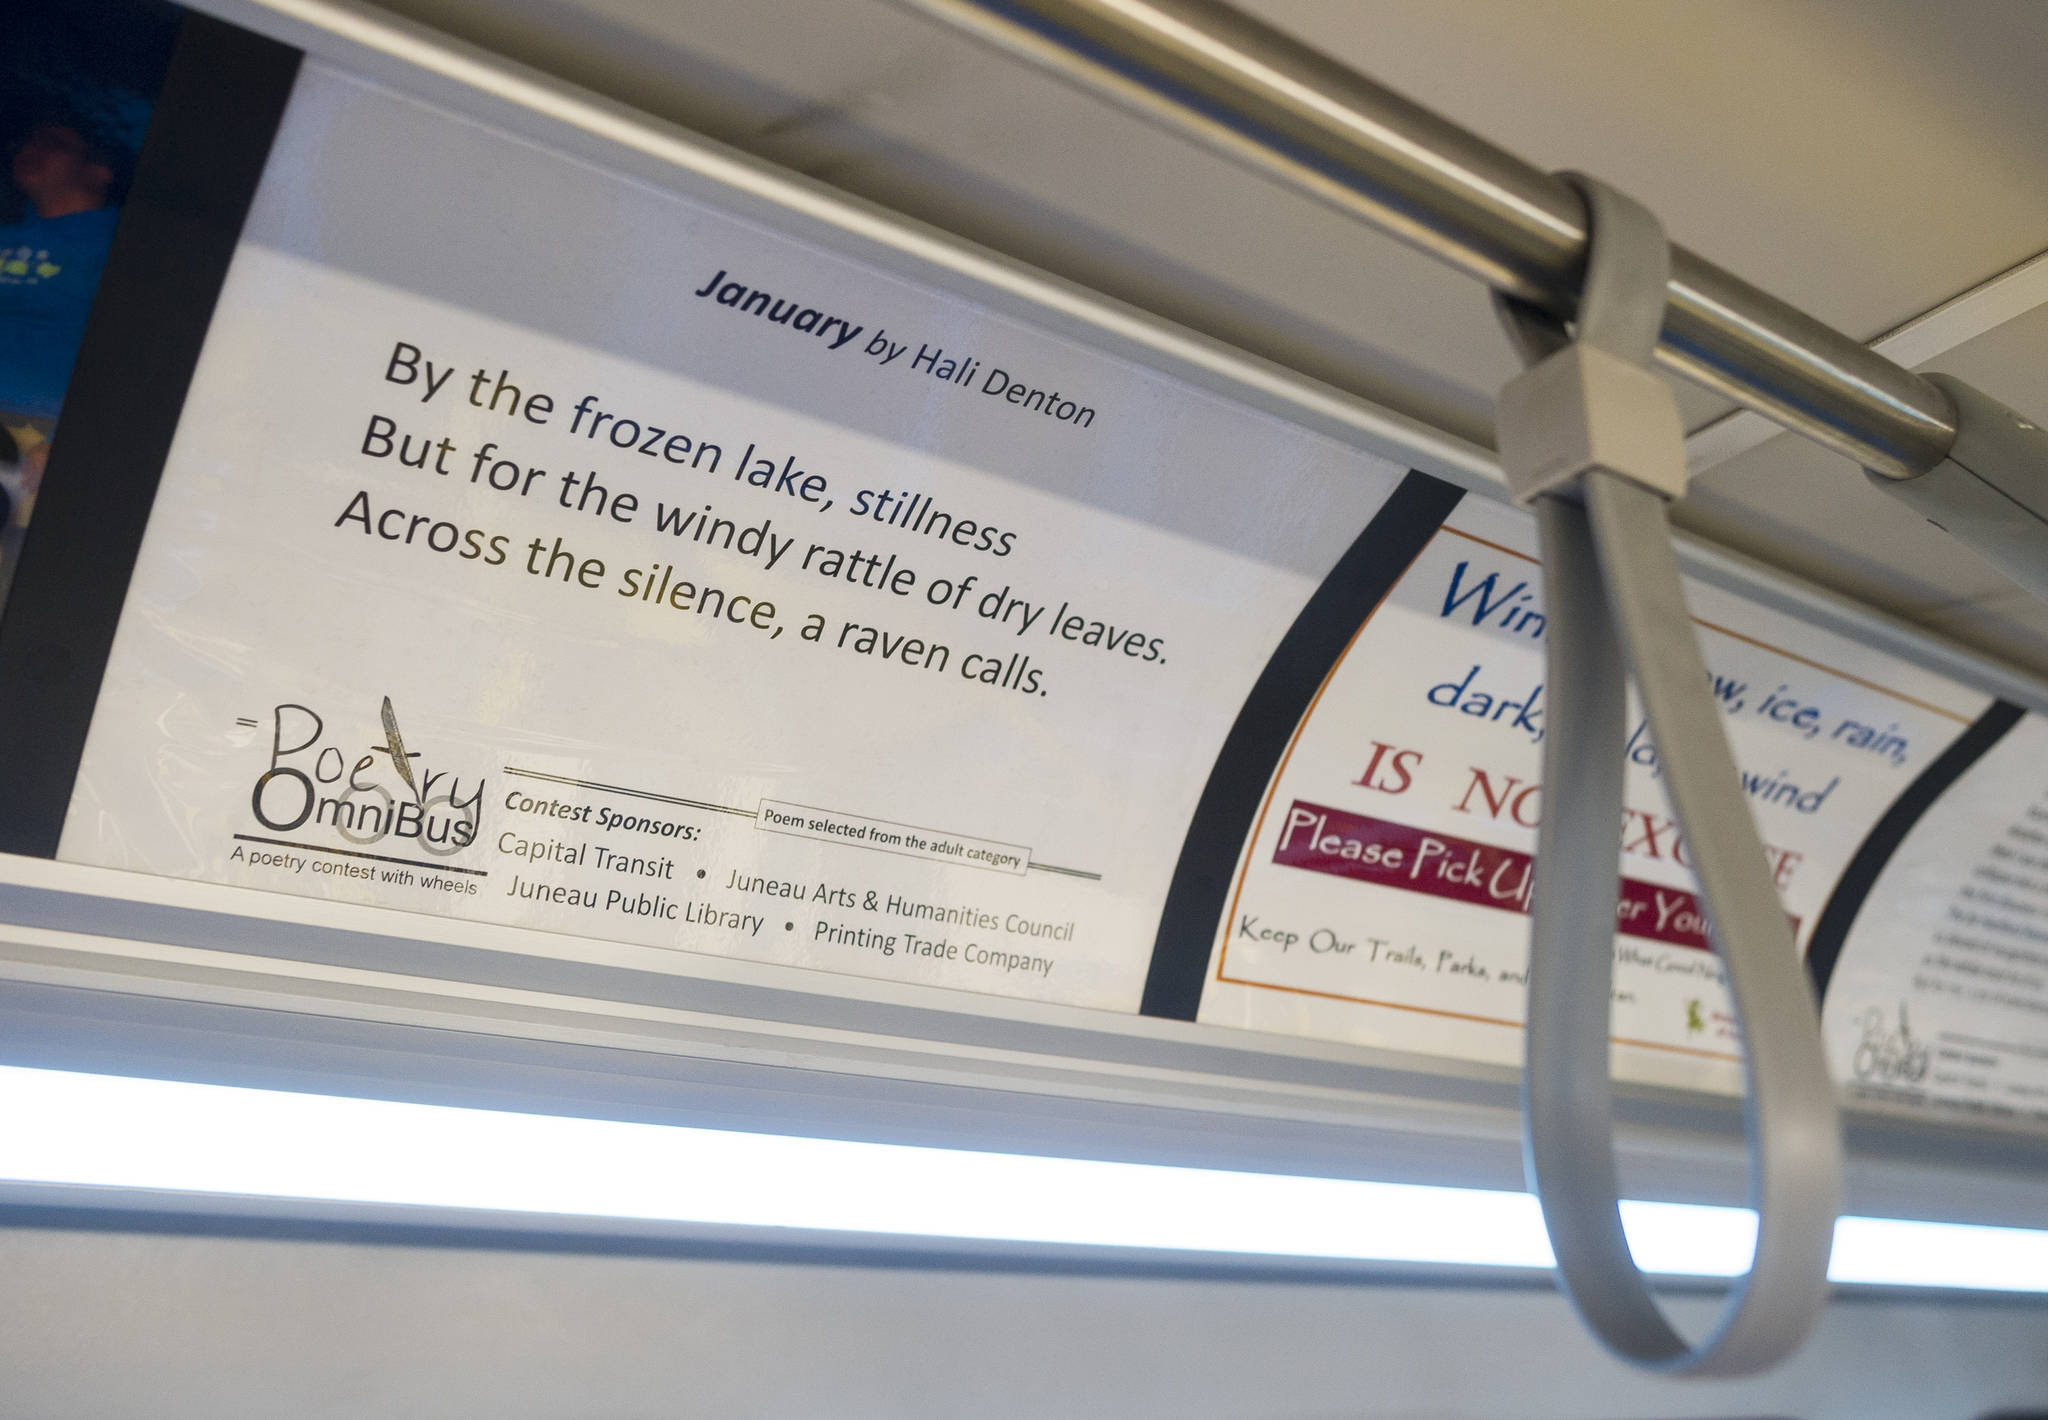 A poem by Hali Denton is displayed on a Capital Transit bus on Thursday, Jan. 4, 2018. Each bus has two selected poem displayed from the annual Poetry OmniBus contest. (Michael Penn | Juneau Empire)